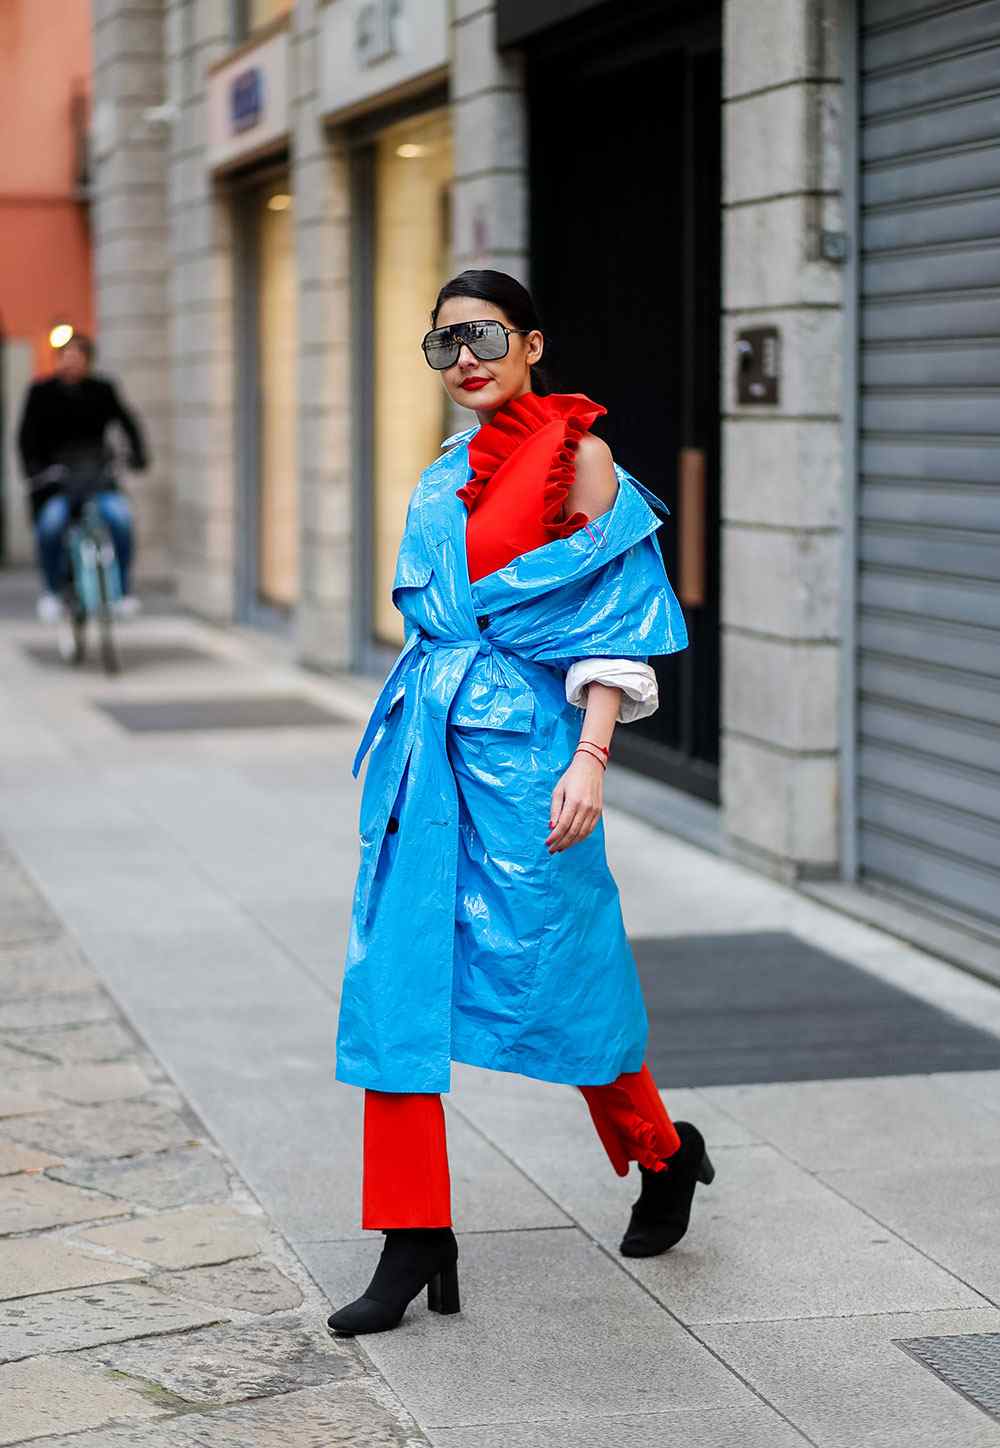 Neon Farben Trenchcoat Overall rot Sonnenbrille Sommer Outfit Ideen